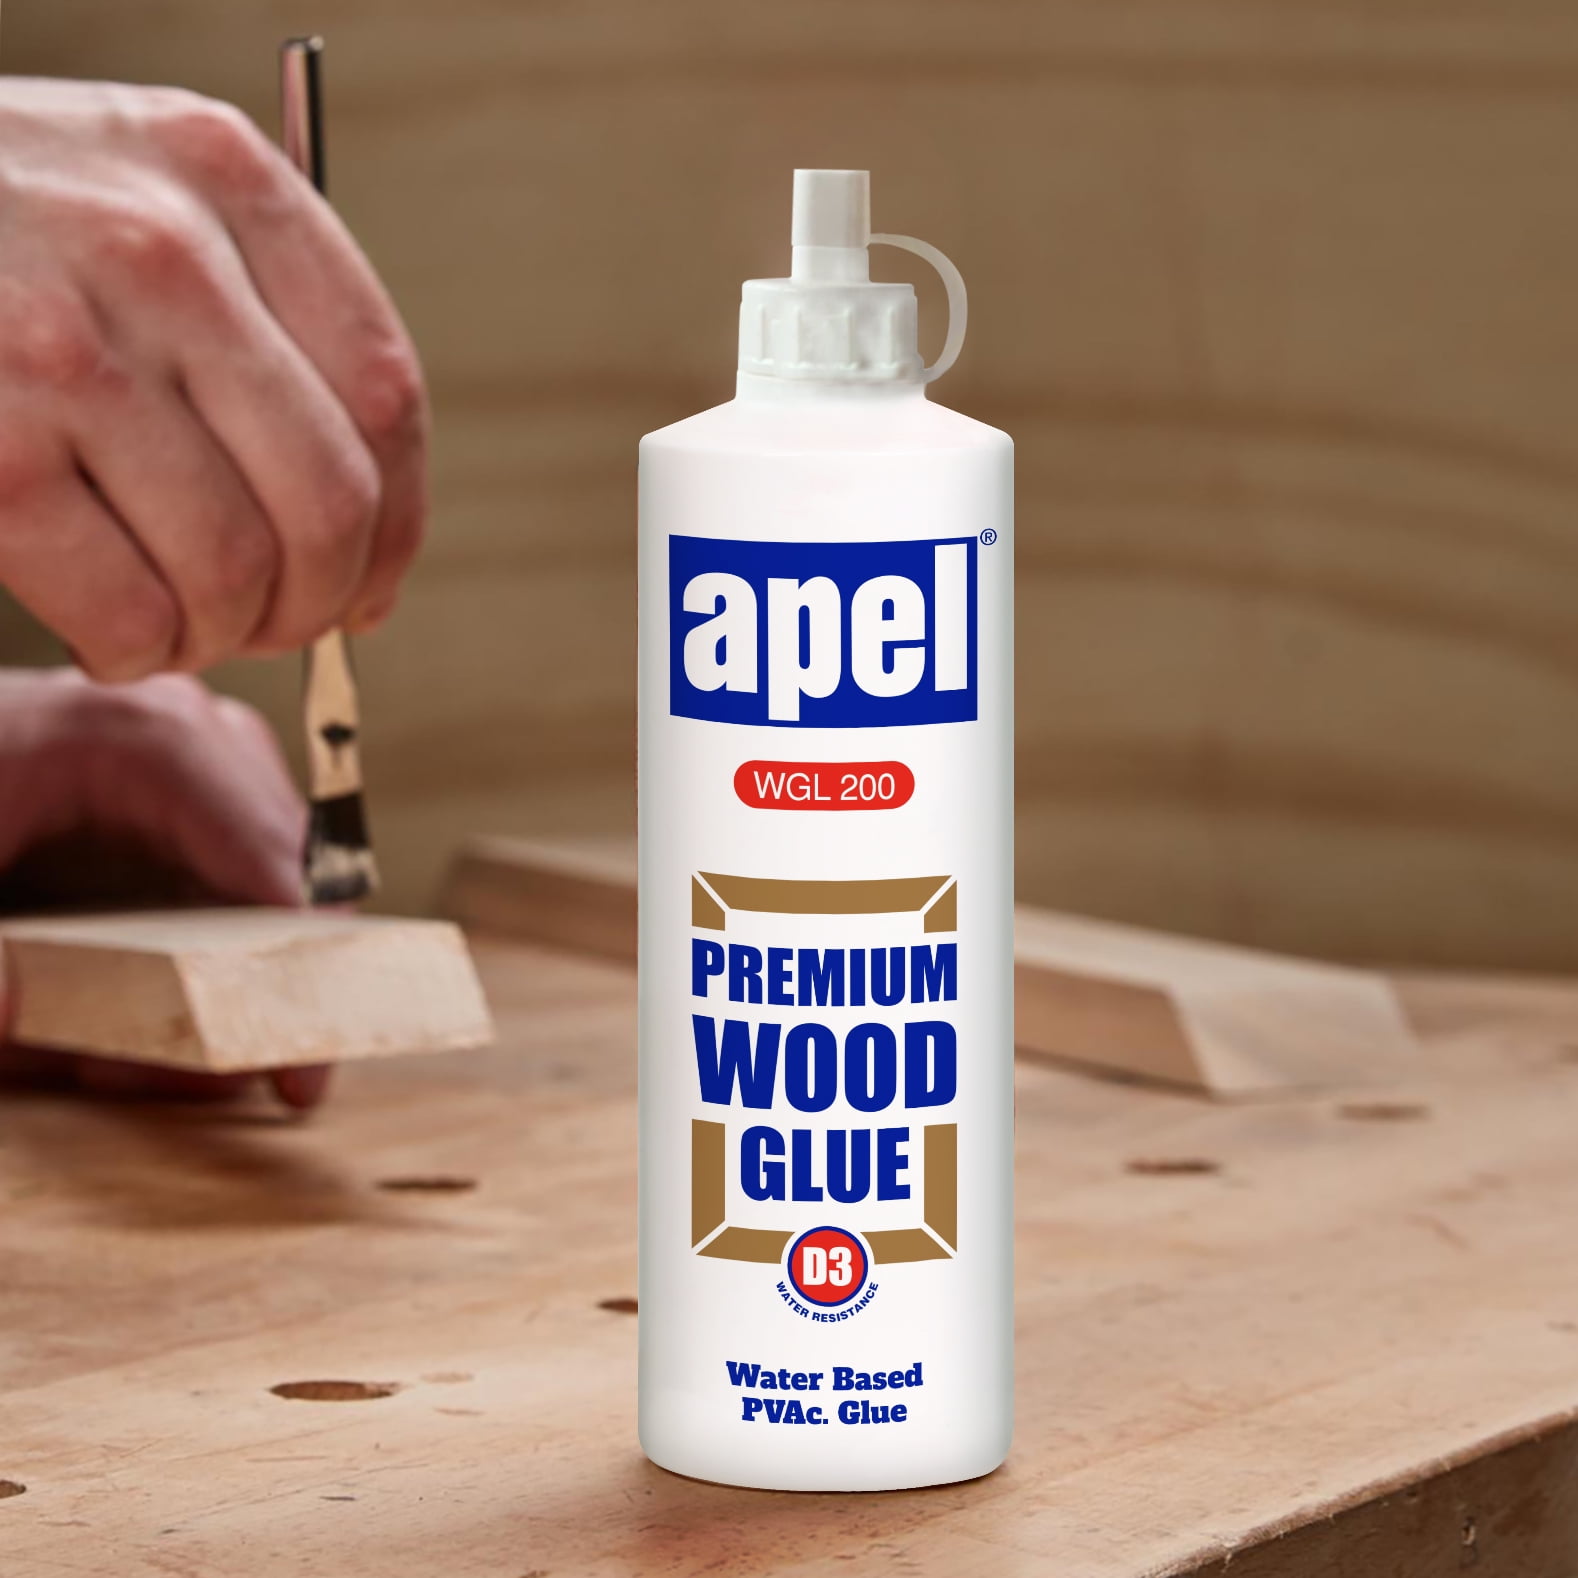 Premium Wood Glue For Woodworking And Hobbies, Extra Strength For Crafts,  Water Resistant Clear PVA Glue - AliExpress